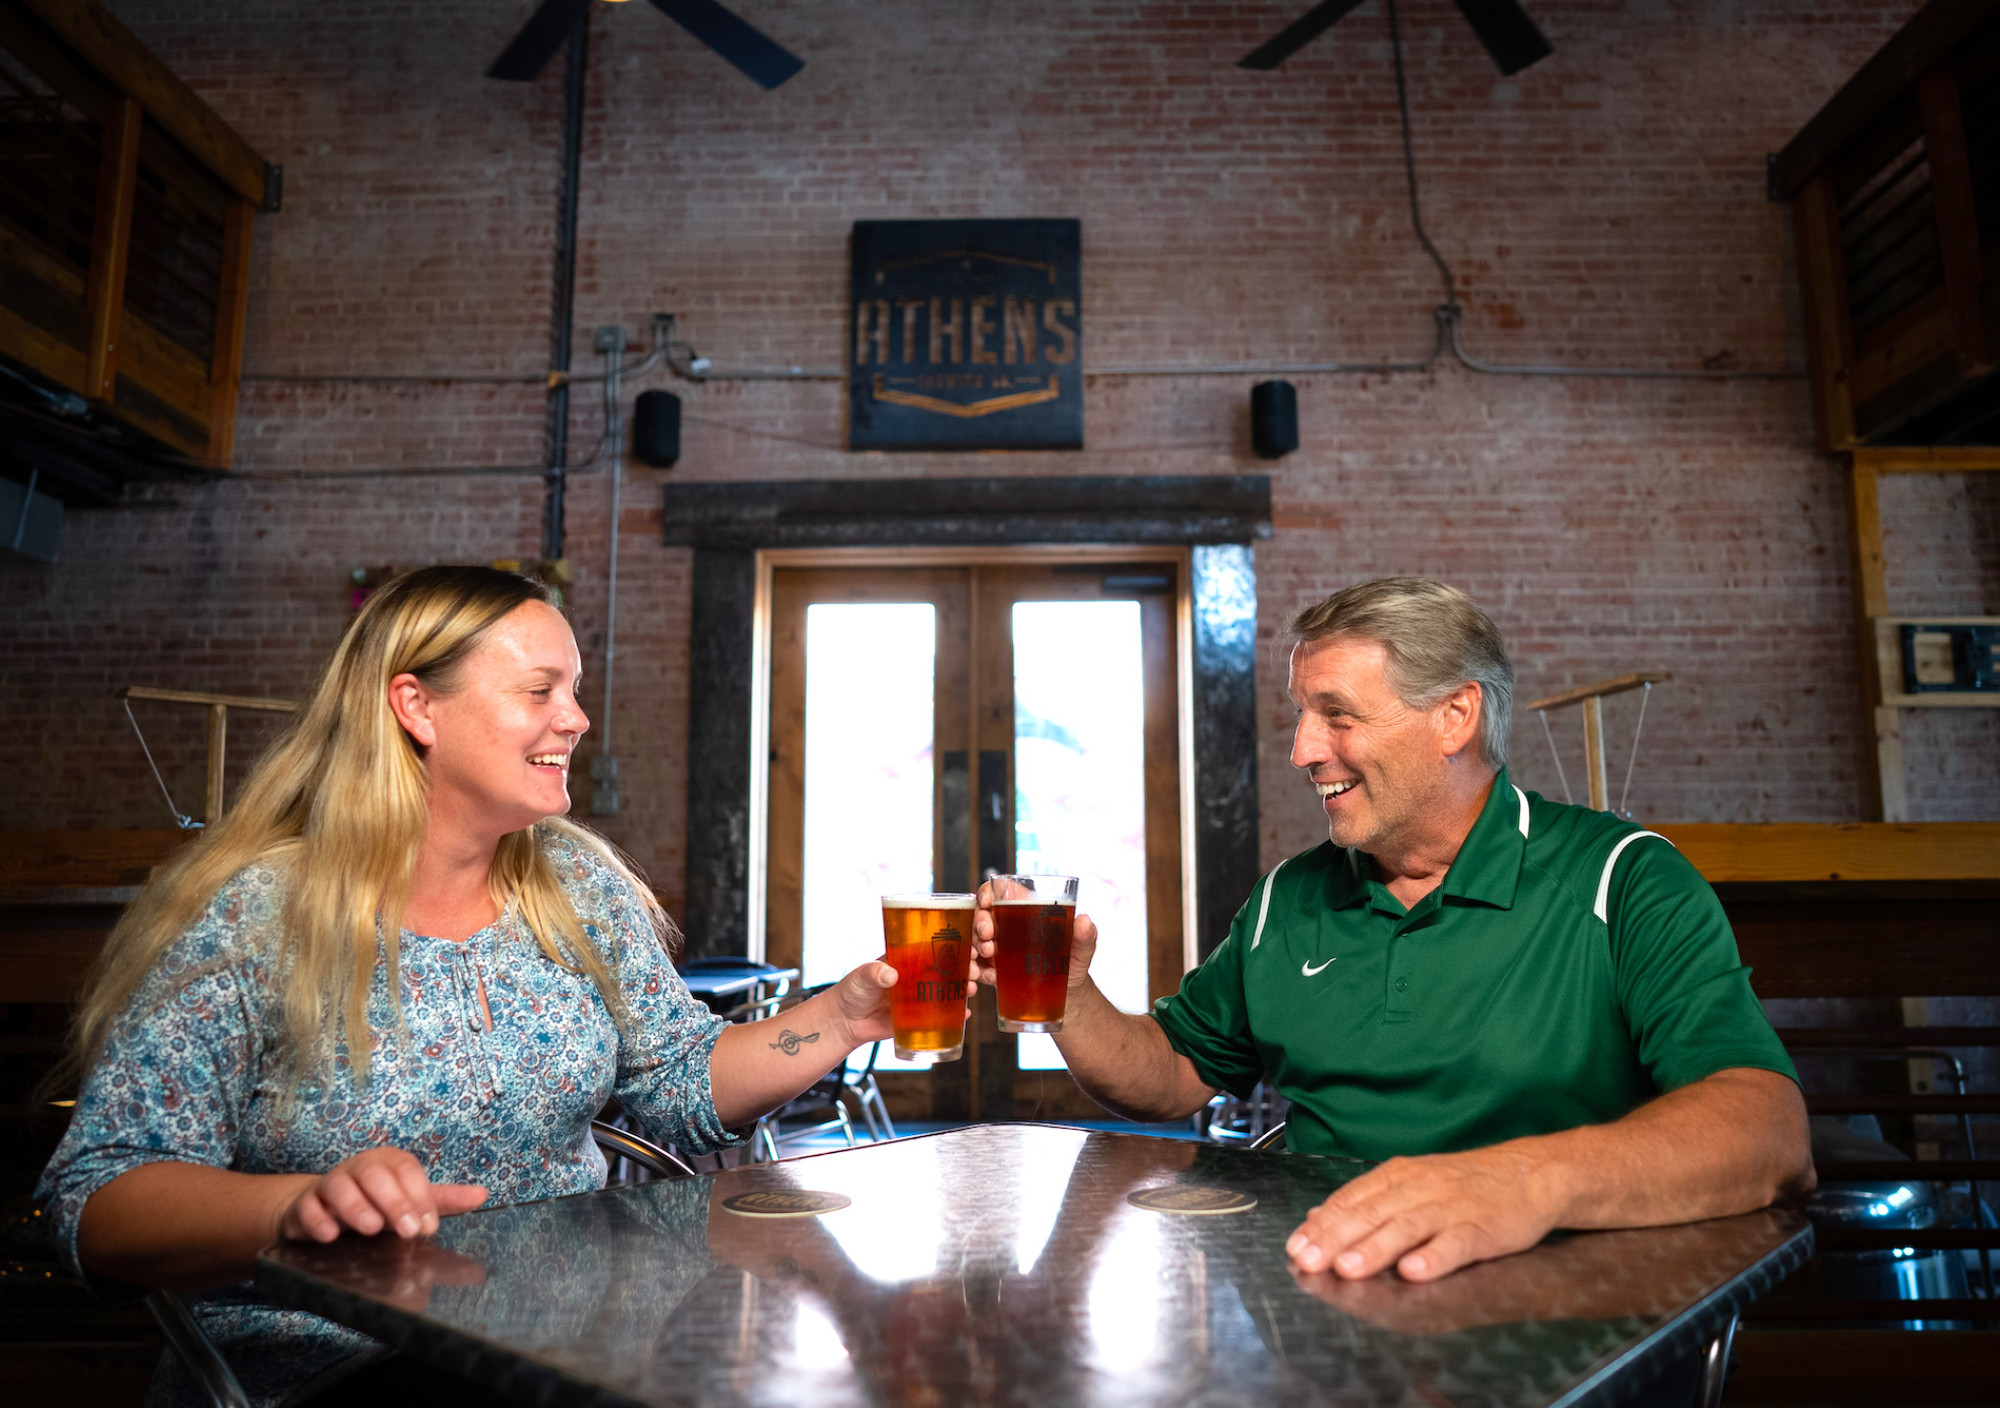 Two people sitting in Athens Brewery drinking together